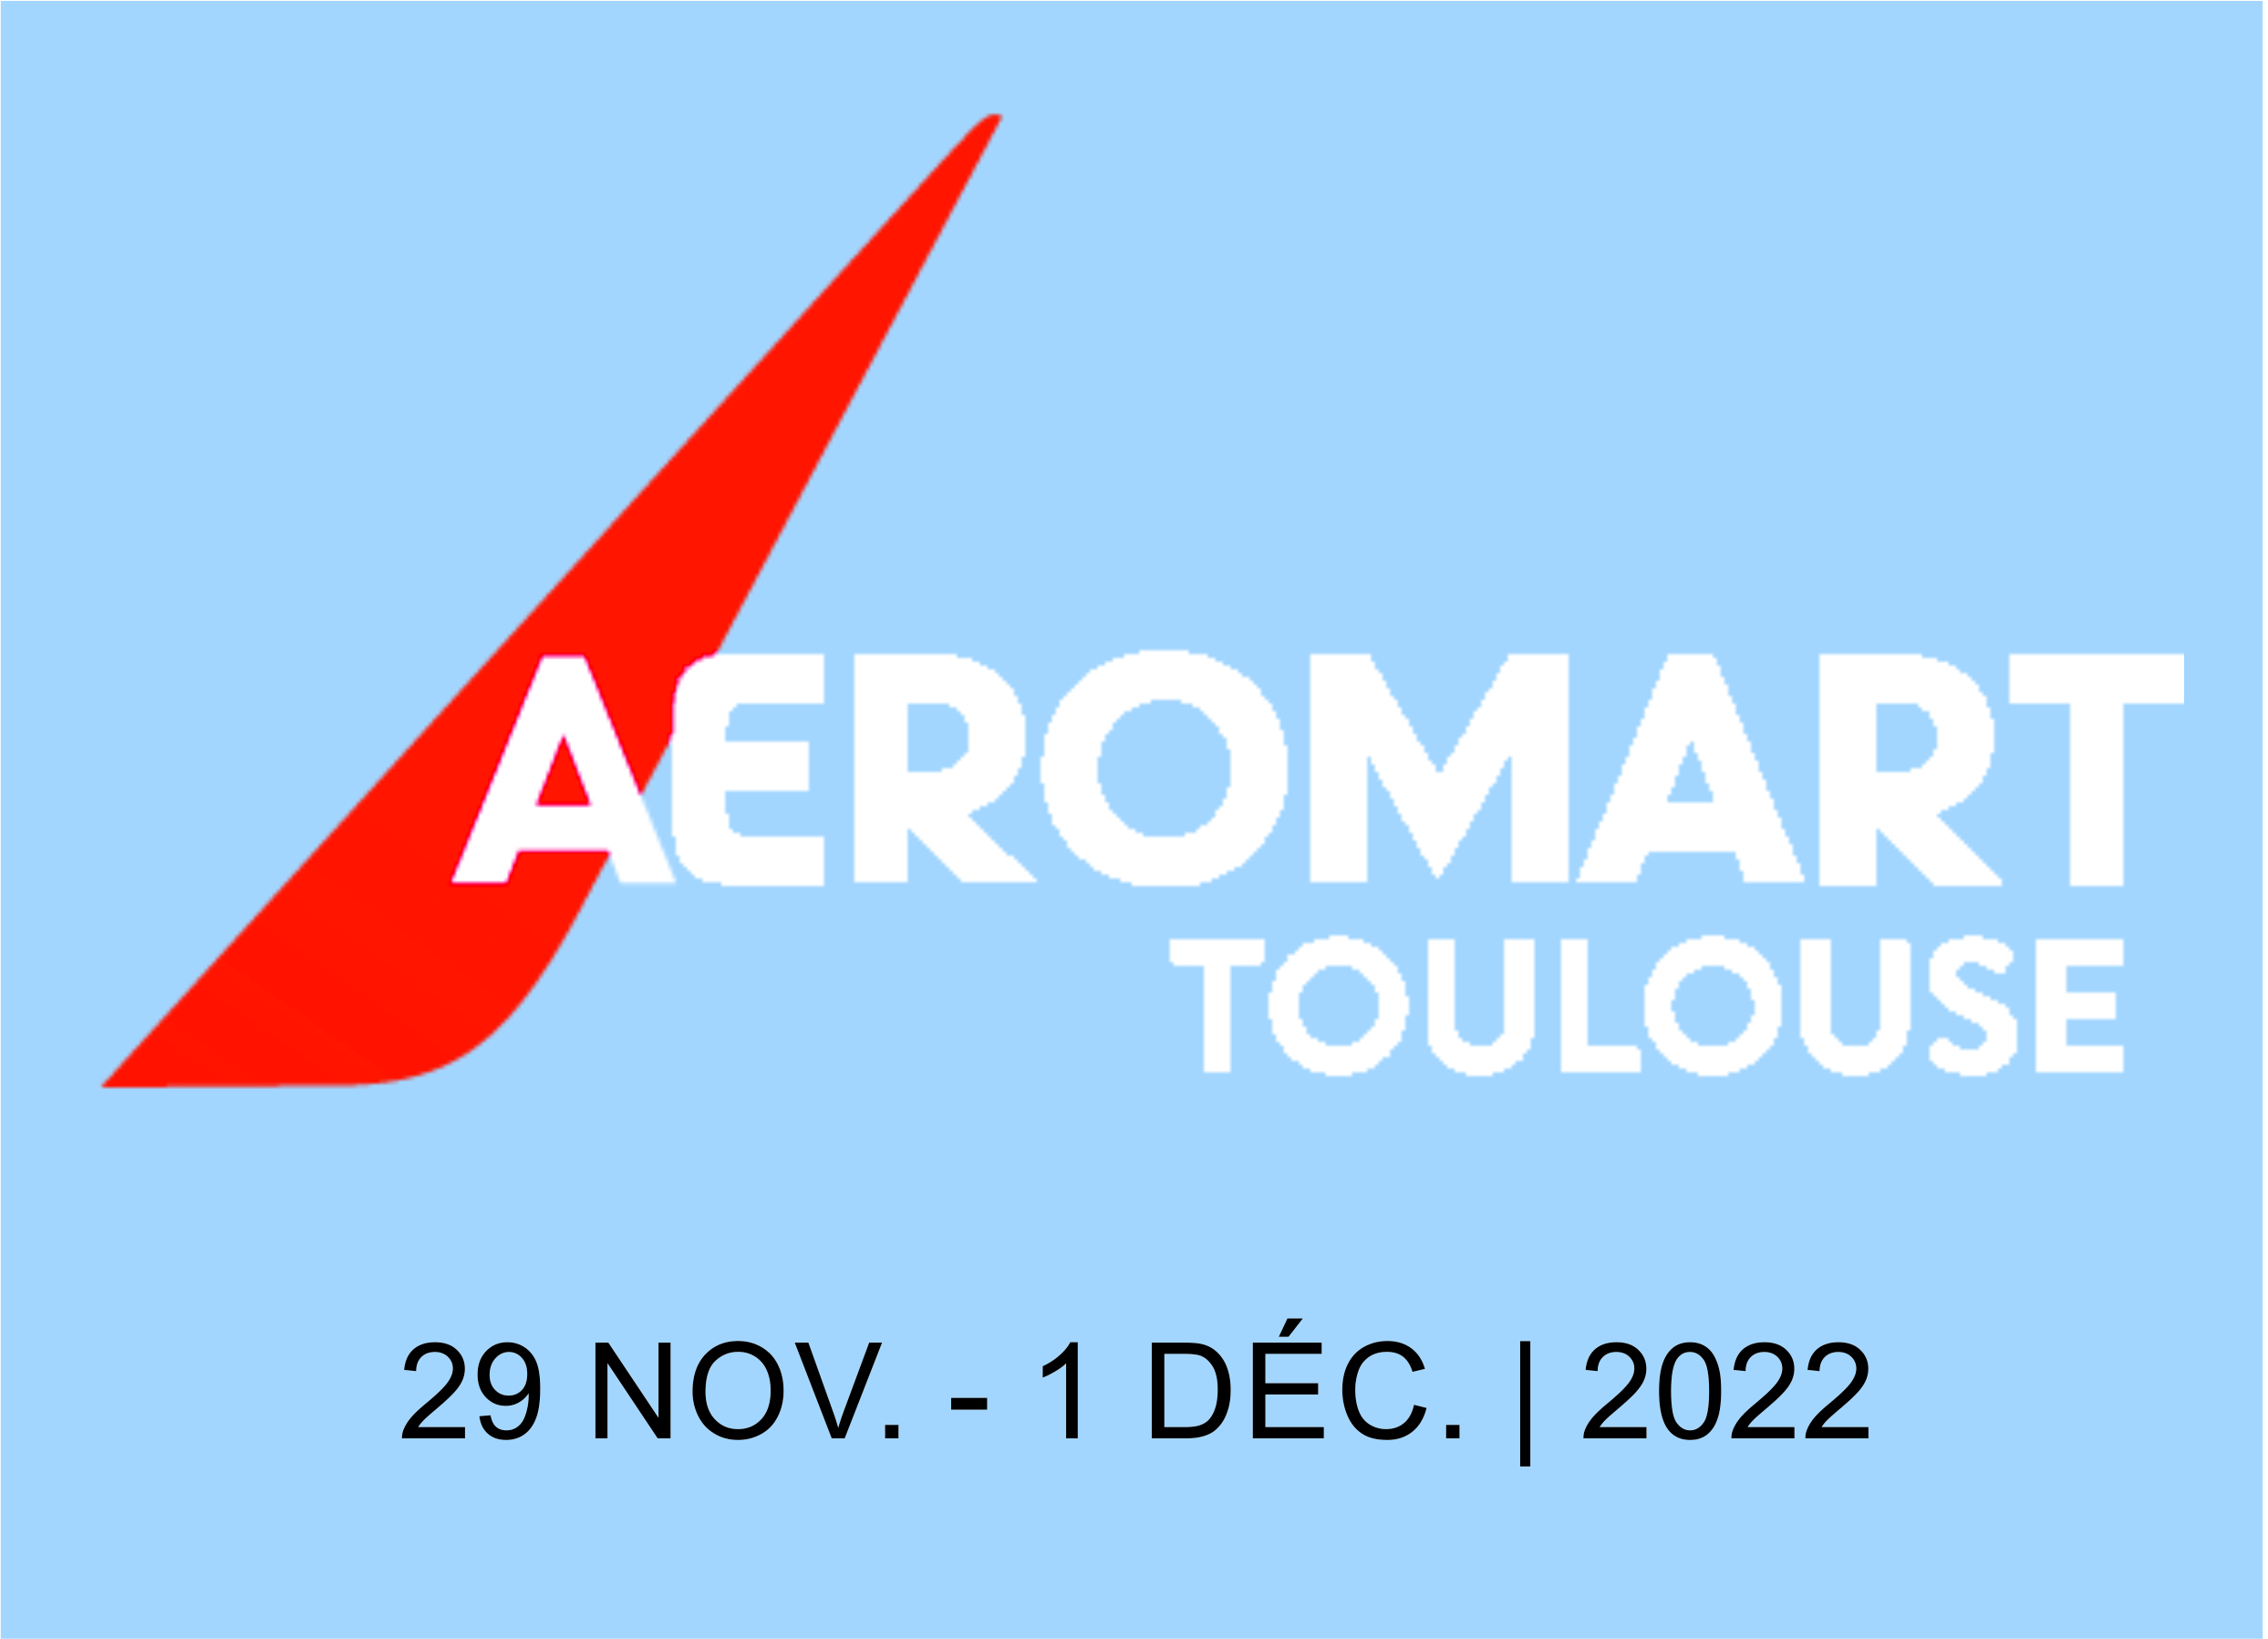 ARESIA is present at AEROMART Toulouse